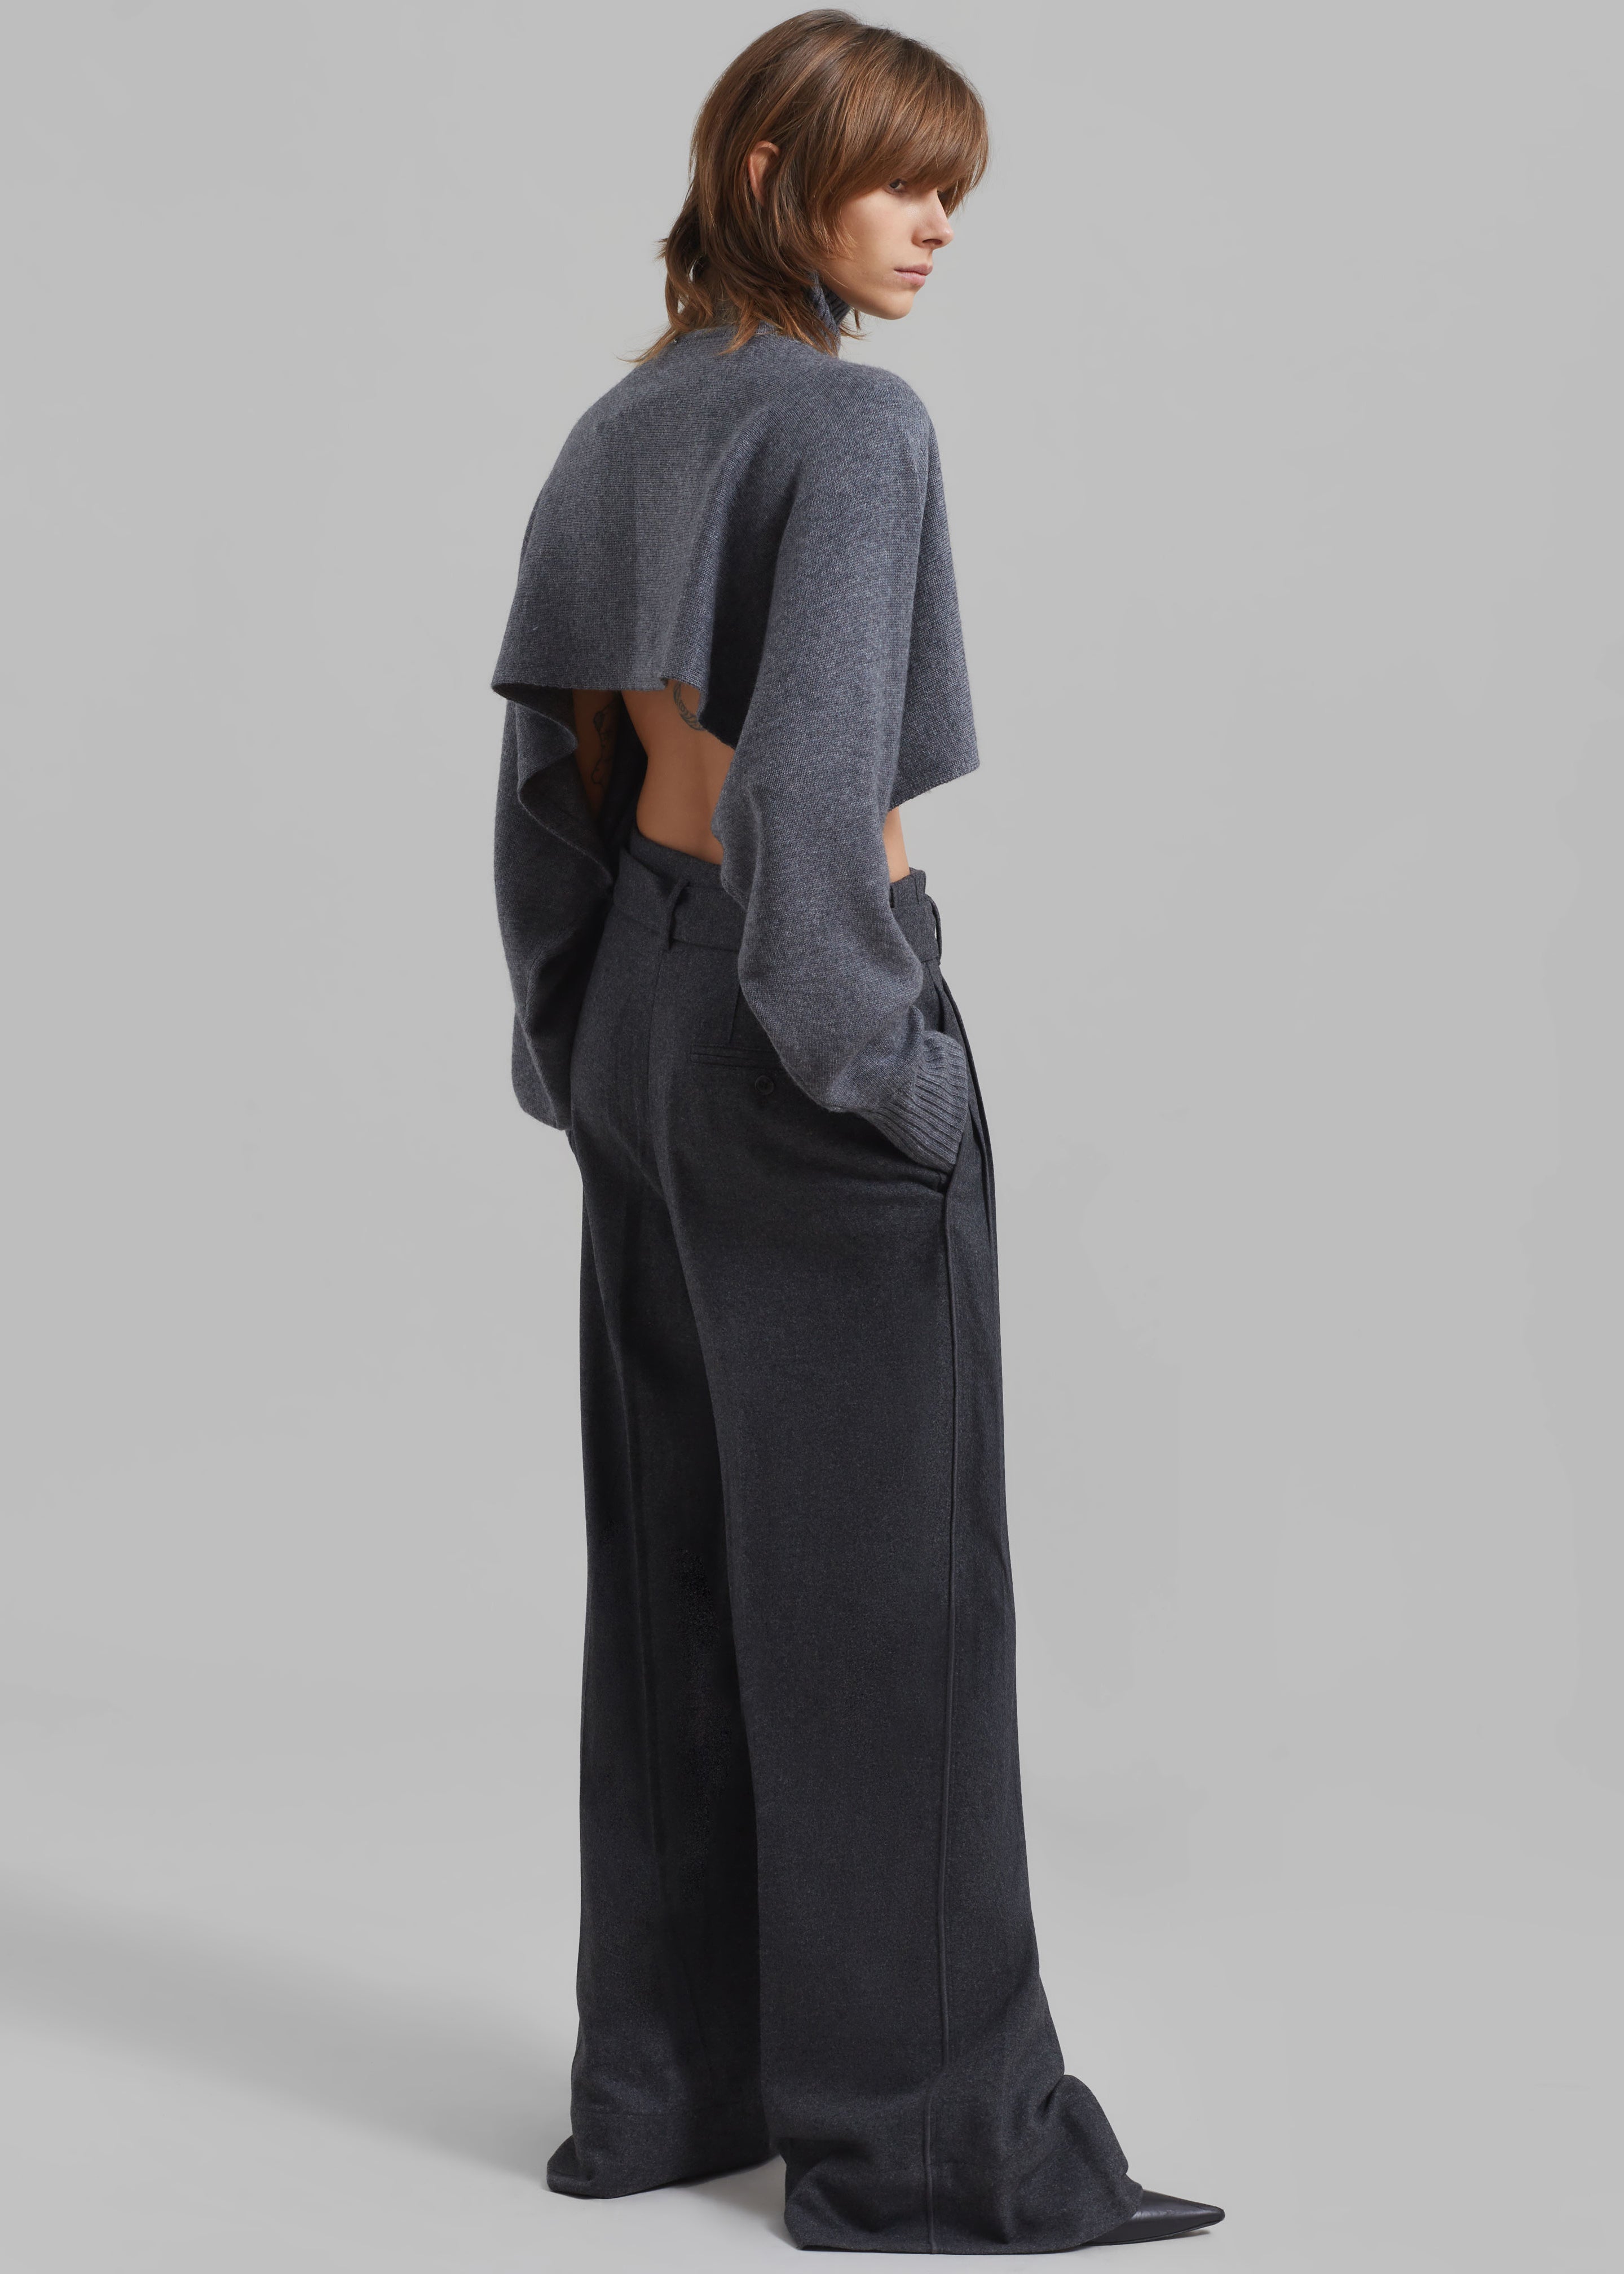 3.1 Phillip Lim Flannel Oversized Pleated Belted Pants - Charcoal - 7